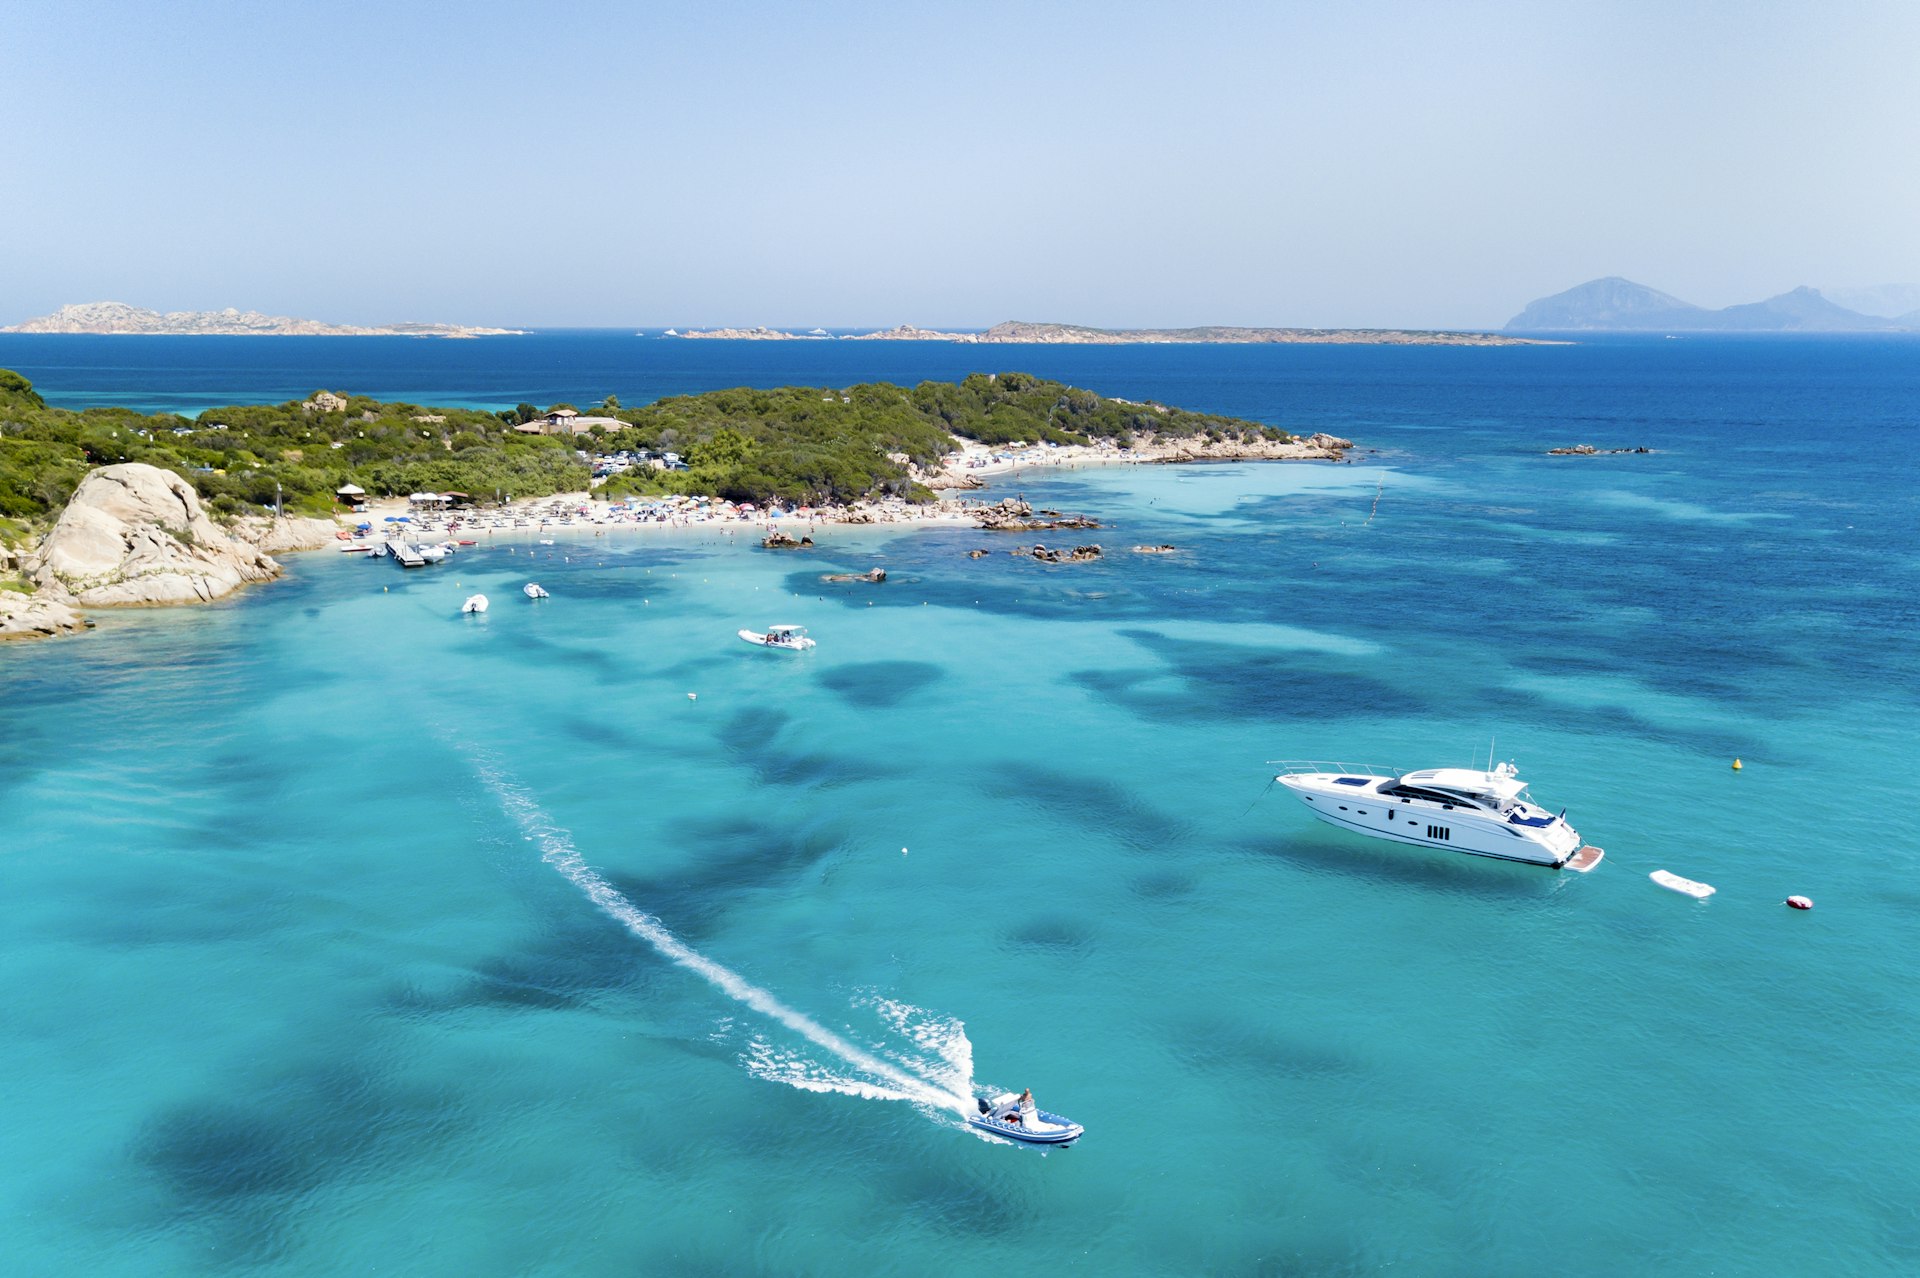 View from above, aerial view of an emerald and transparent mediterranean sea with a white beach and some boats and yachts. Costa Smeralda, Sardinia, Italy.